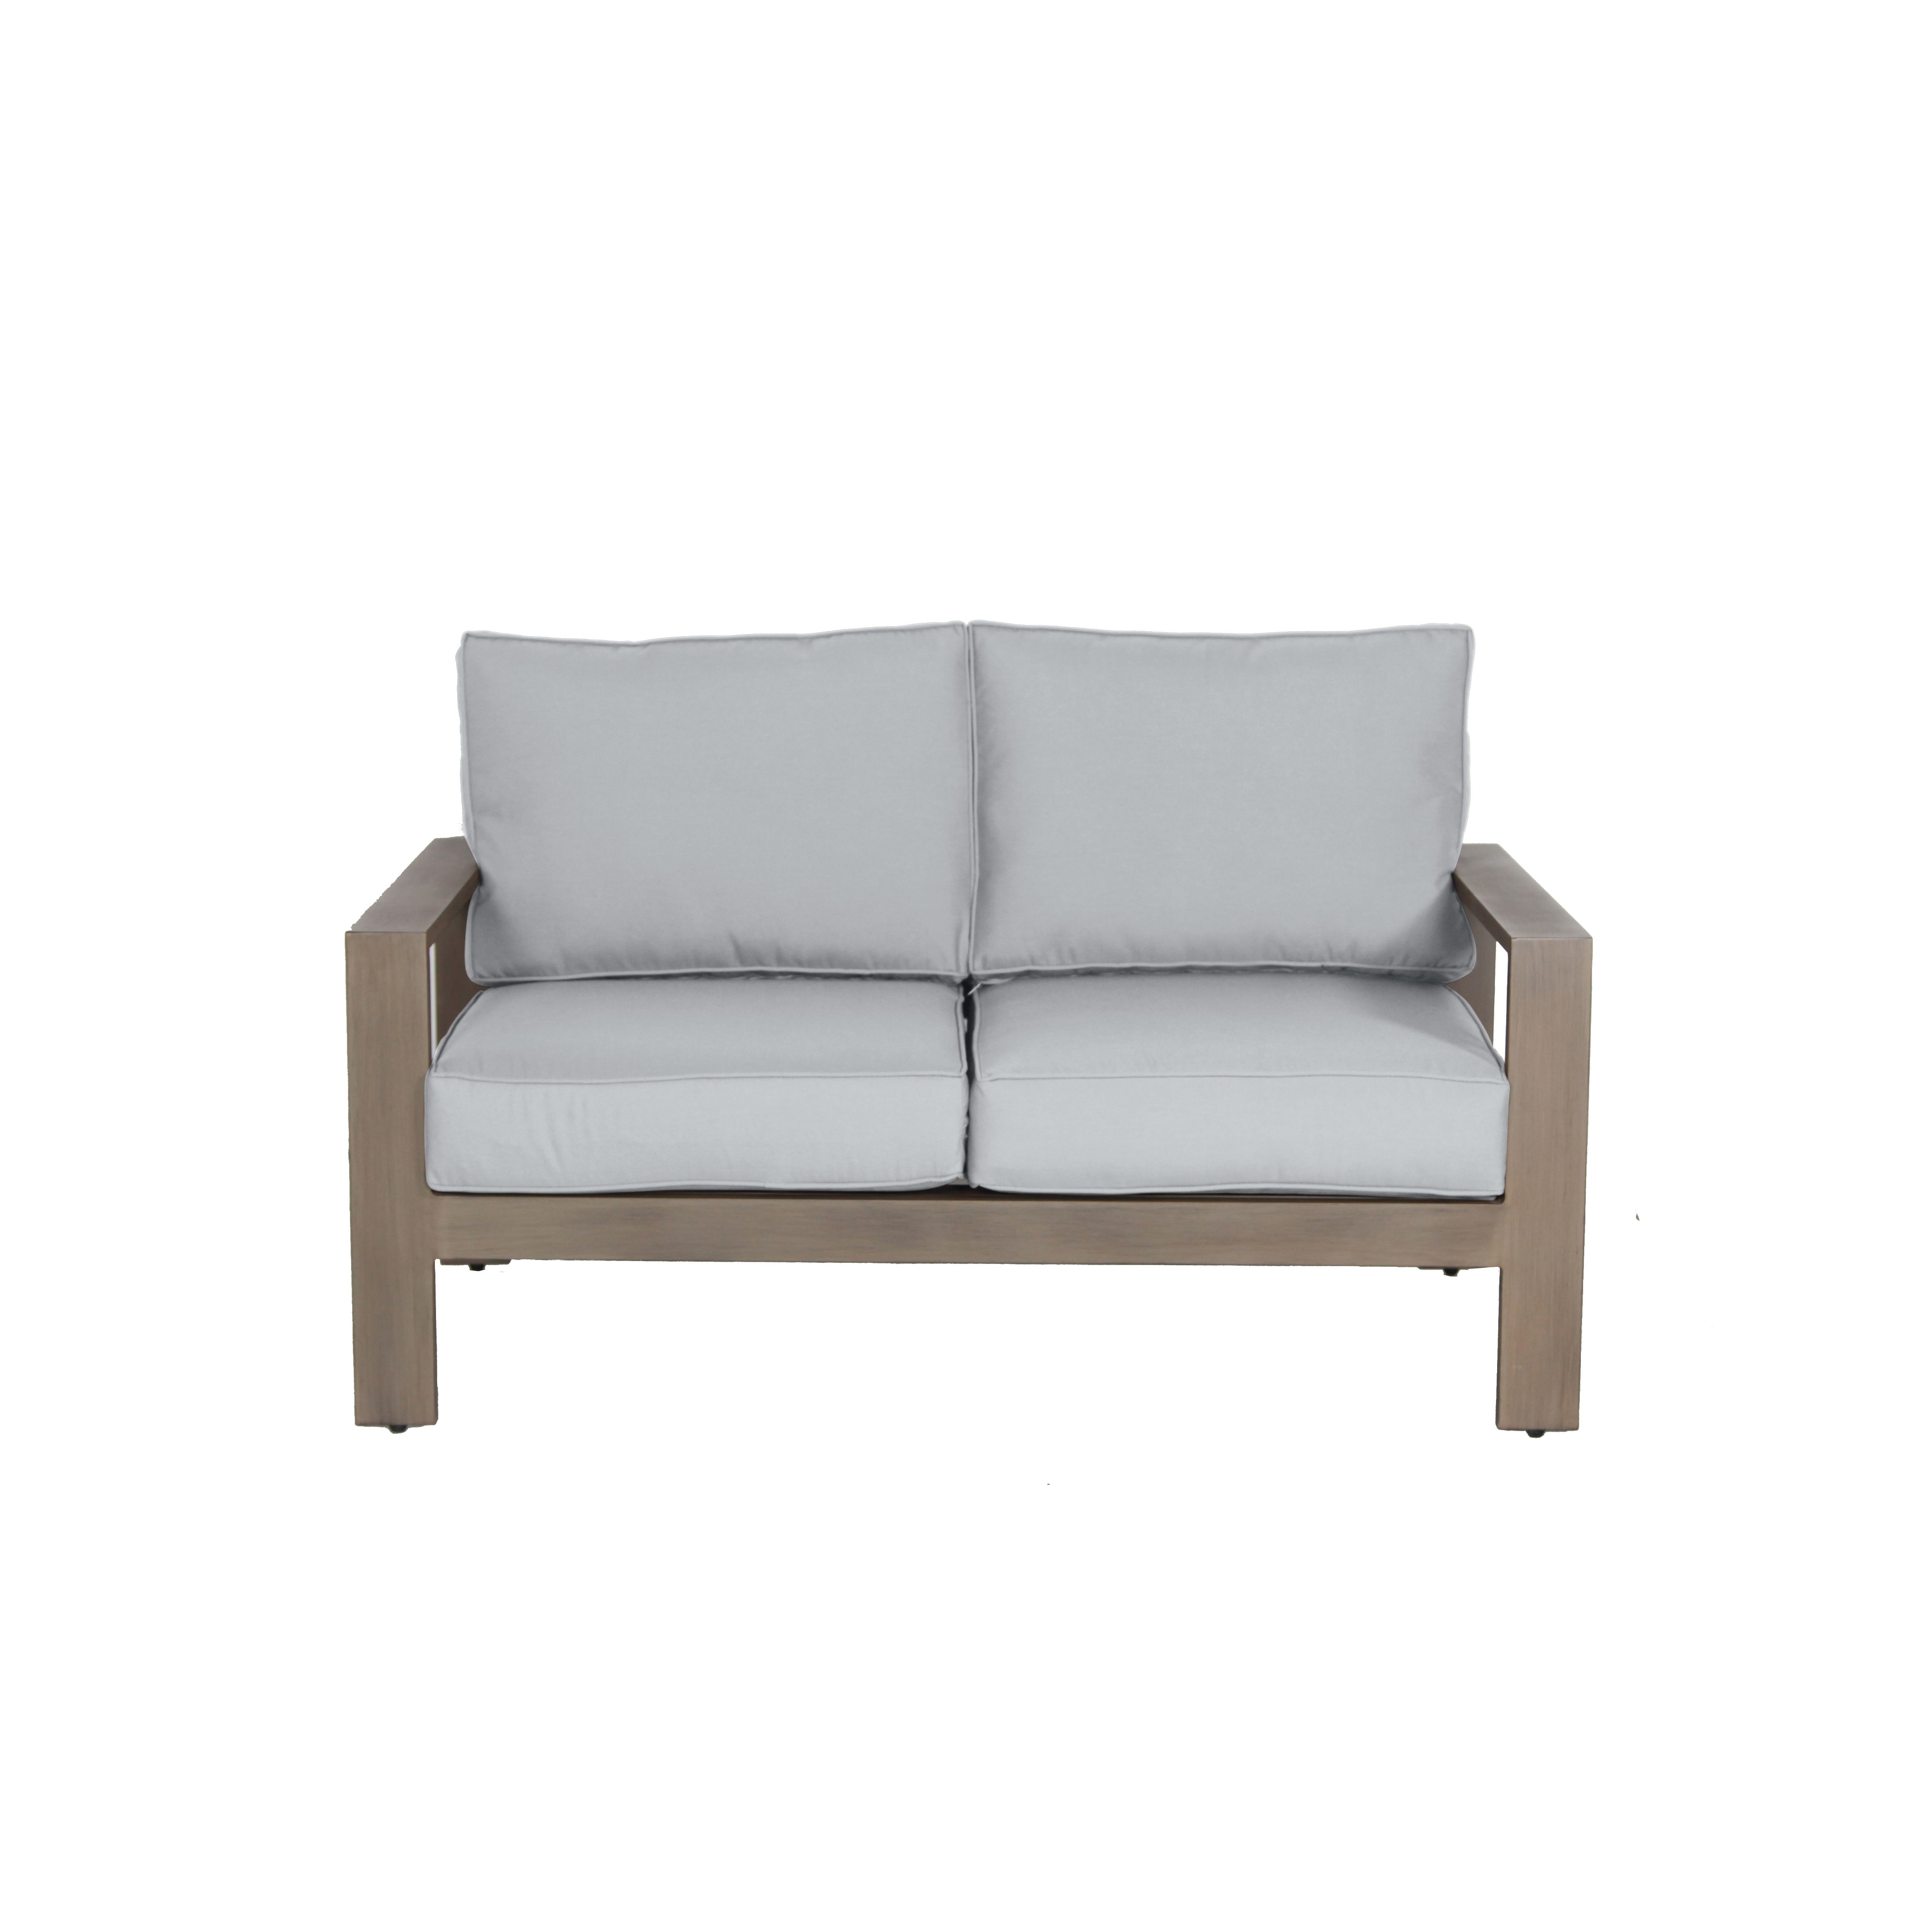 Aruba Aluminum Frame Love Seat With Cushion In Handpainted Taupe